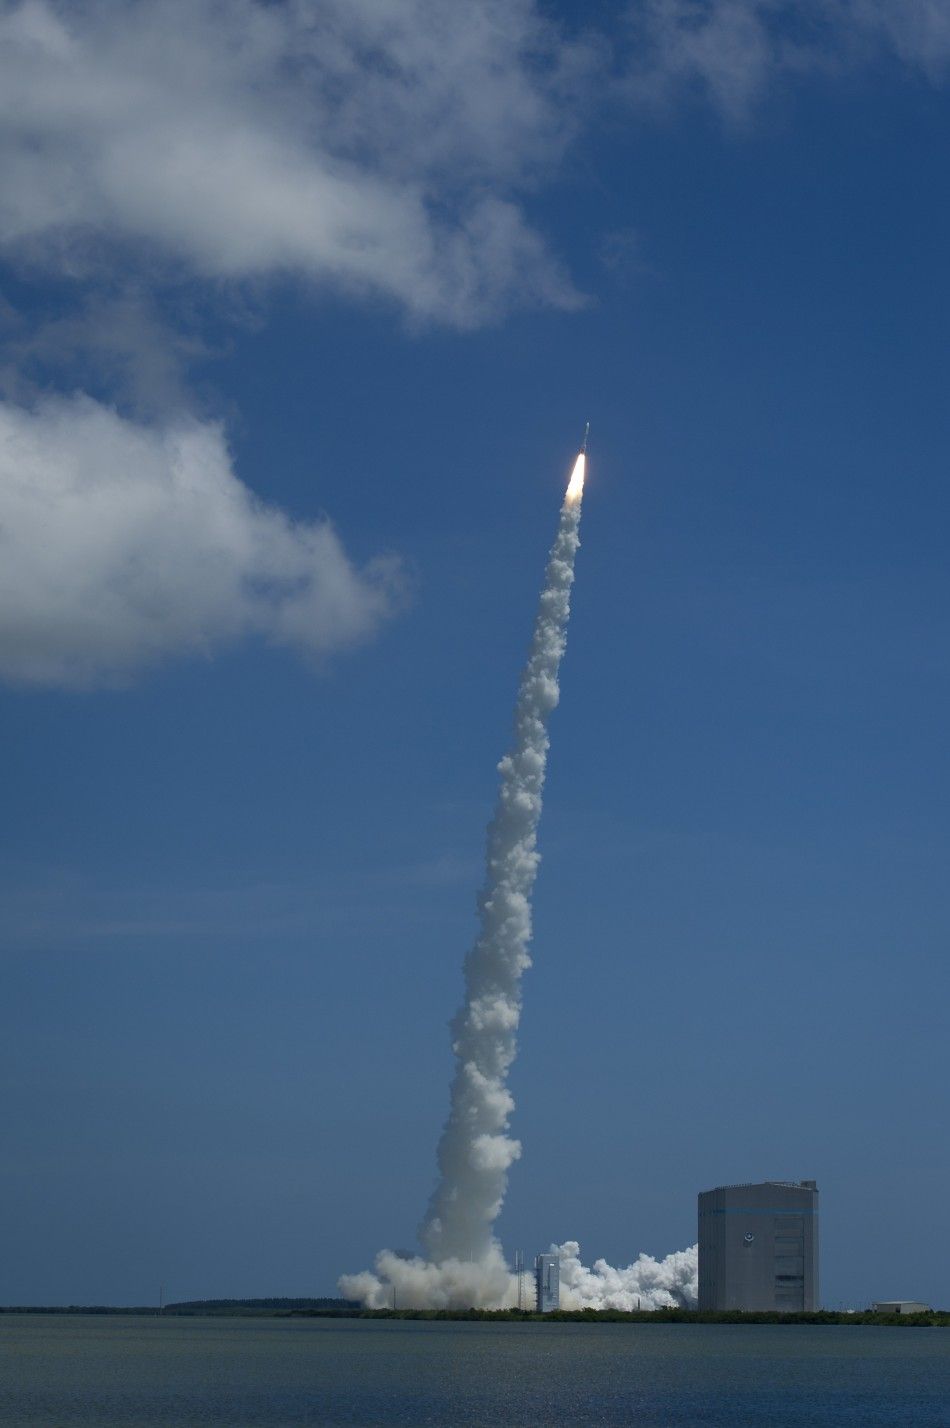 An Atlas V rocket launches with the Juno spacecraft payload from Space Launch Complex 41 at Cape Canaveral Air Force Station in Florida